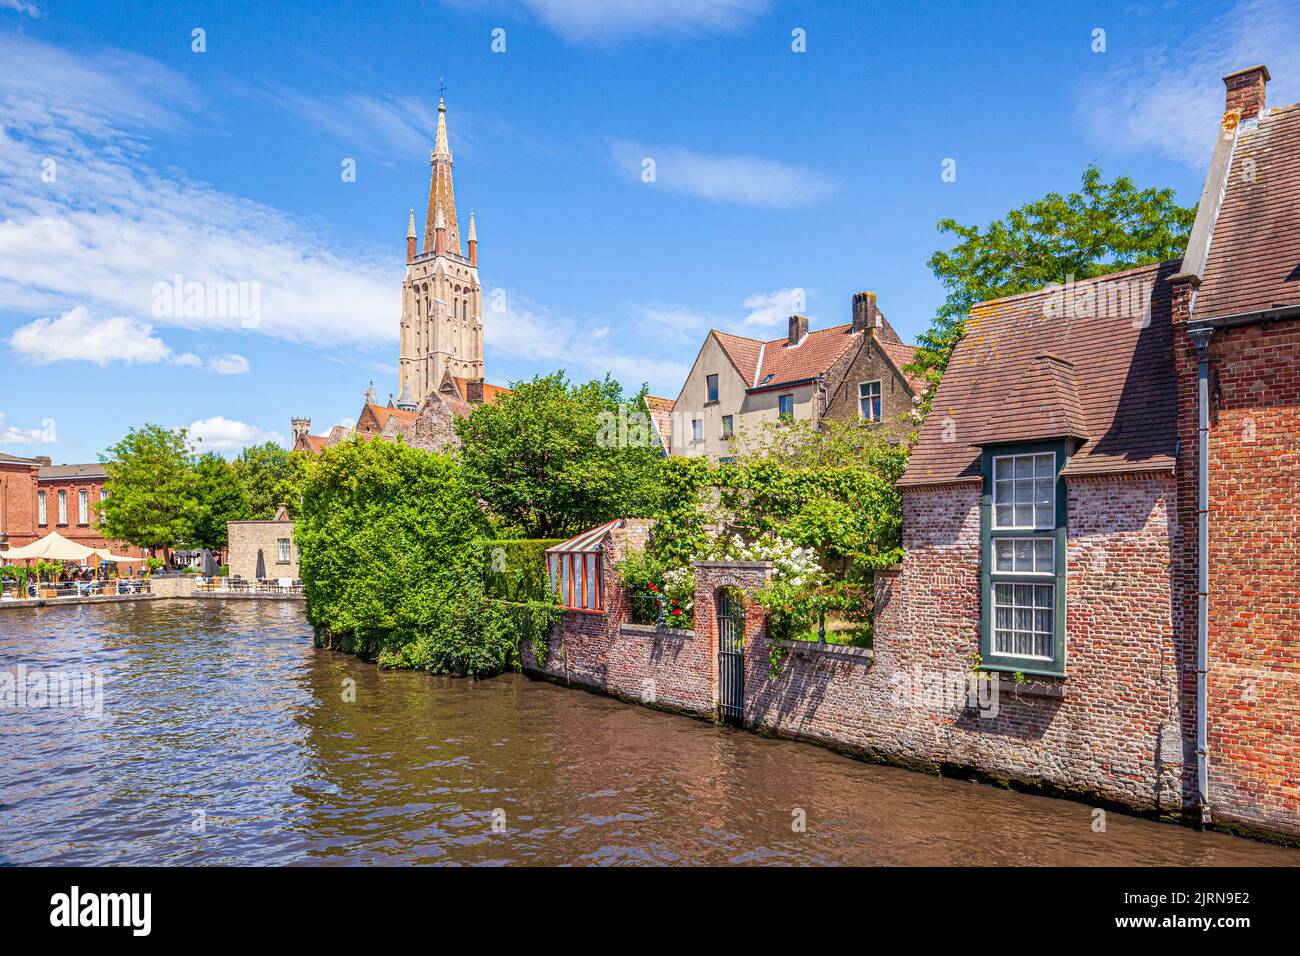 The spire of the Church of Our Lady (Onze-Lieve-Vrouwekerk) overlooking old houses beside the canal in Bruges, Belgium Stock Photo